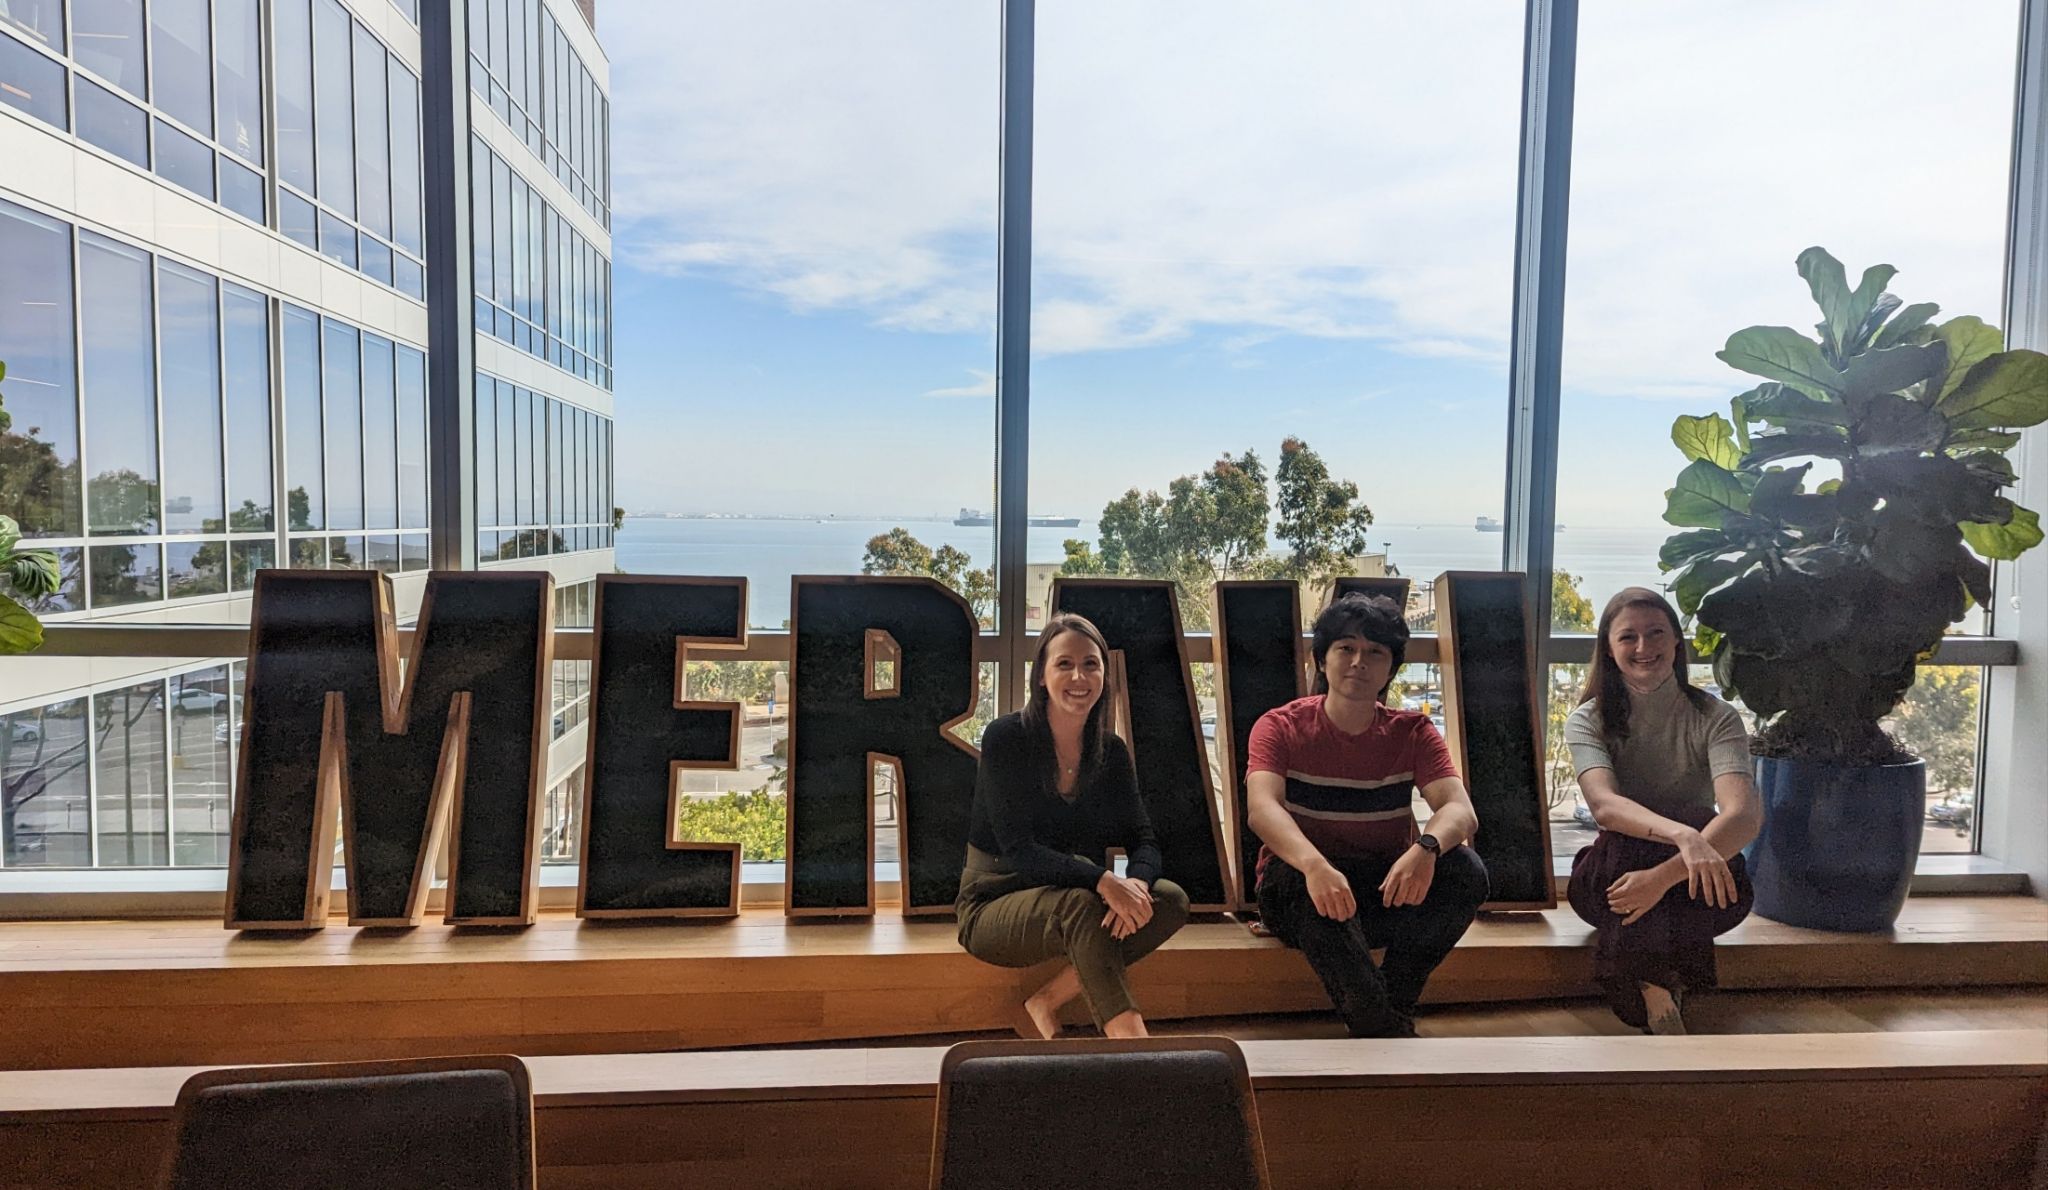 Megan Donogue (left), and Rachelle Ireson (right) of McMaster ECCS sit in front of a window with the Cisco Meraki sign with Calvin Suan (middle), Mechatronics co-op student